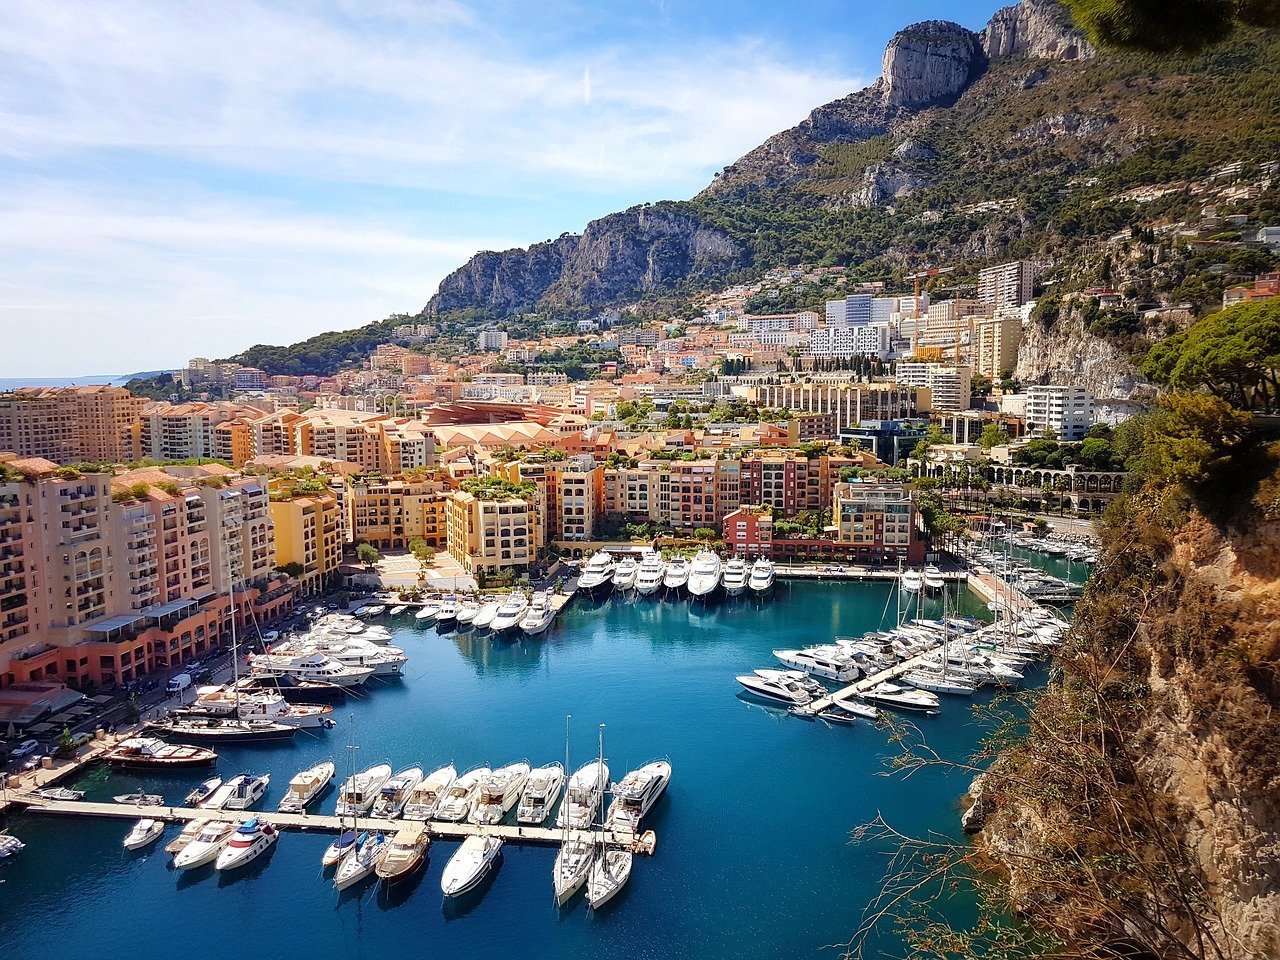 Monaco is not a 'poor dad' option but is an easy residence option if you have the financial resources